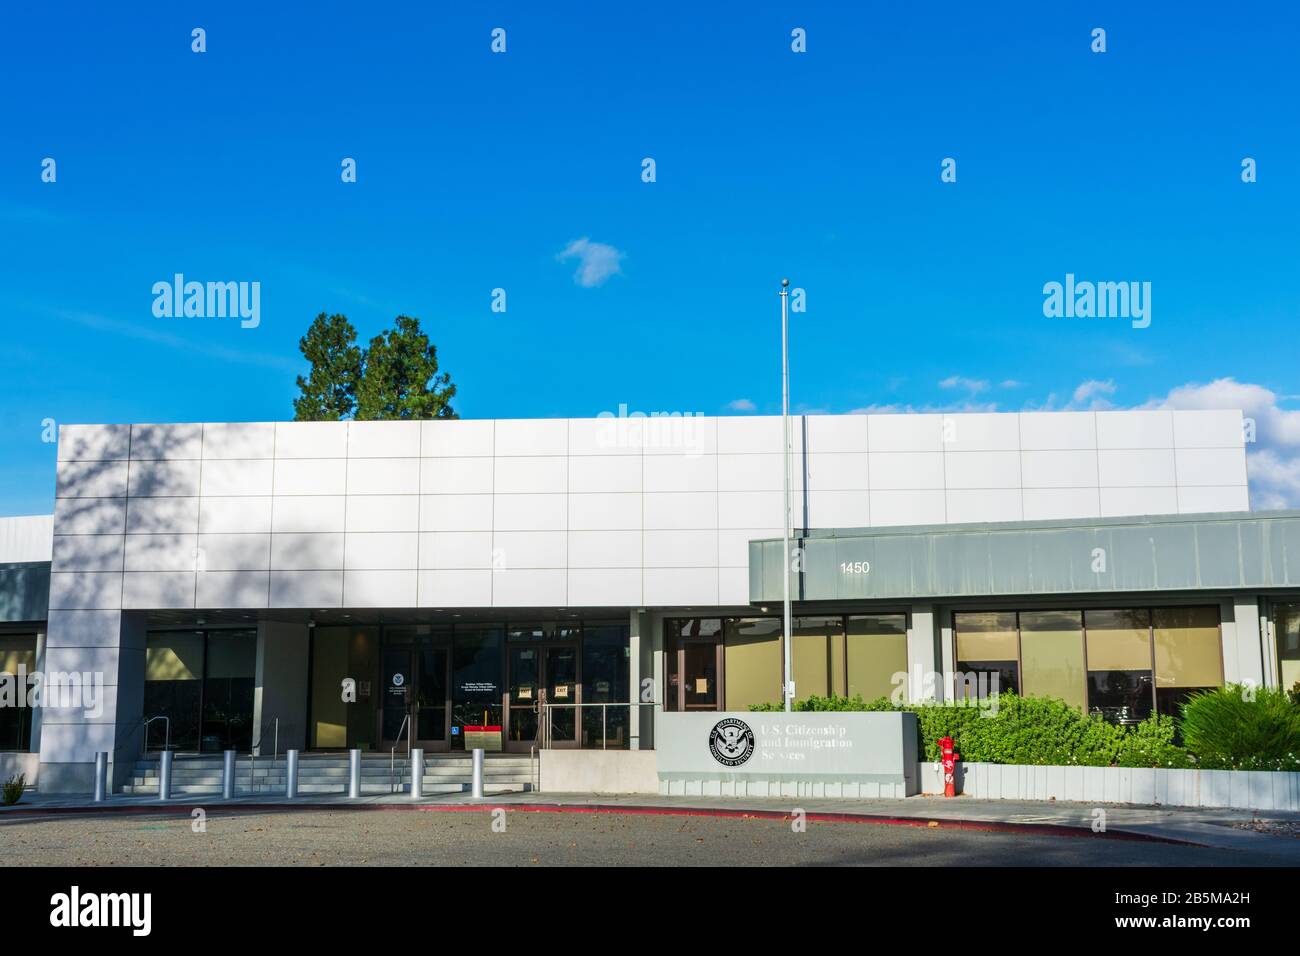 U.S. Citizenship and Immigration Services, USCIS, field office exterior view. USCIS is an agency of the U.S. Department of Homeland Security (DHS) - S Stock Photo